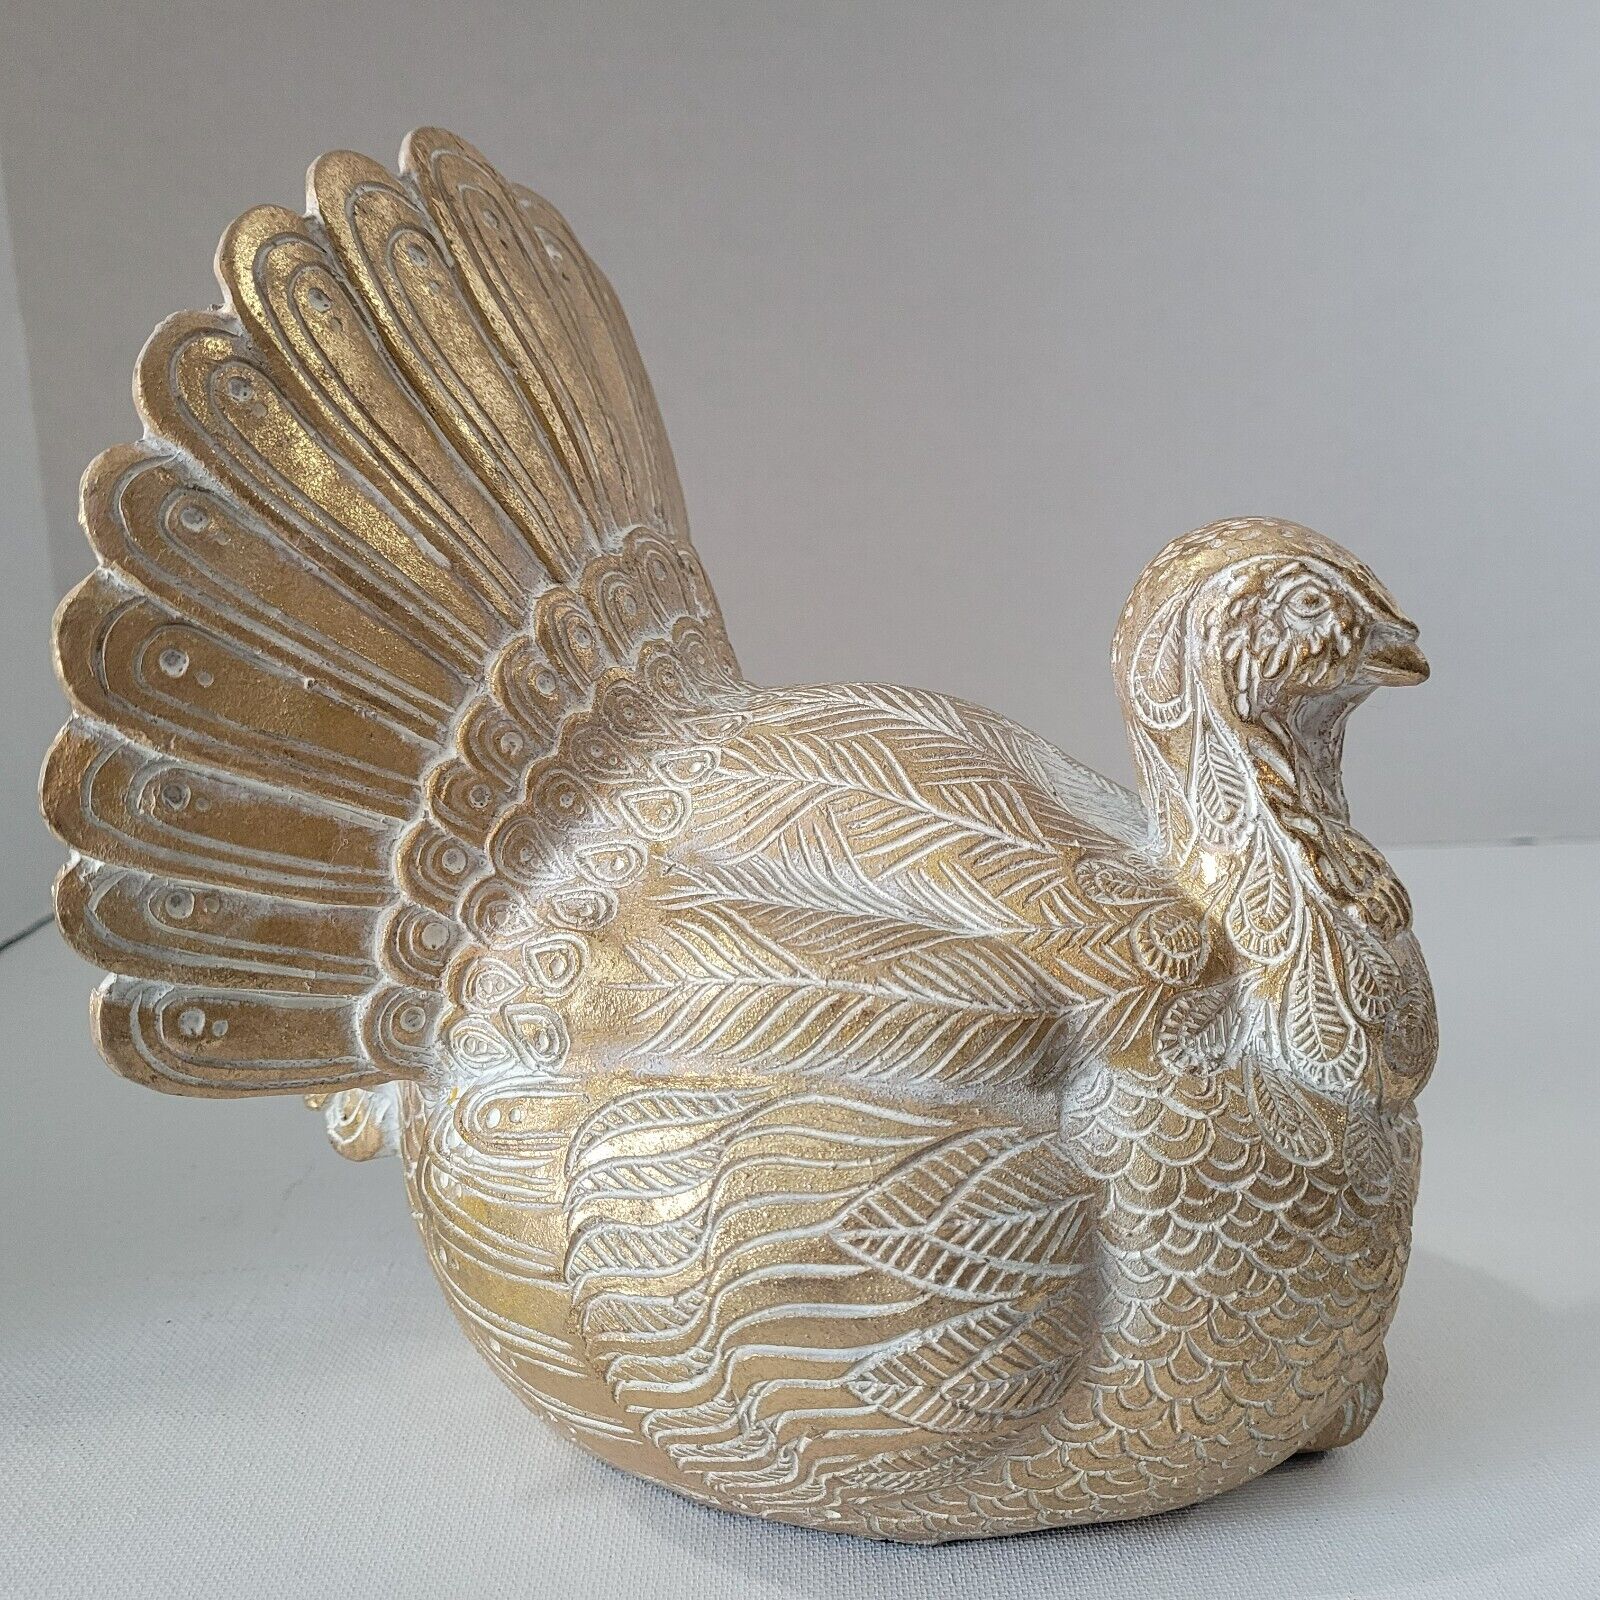 Decorative Gold Resin Turkey with White Wash Accenting